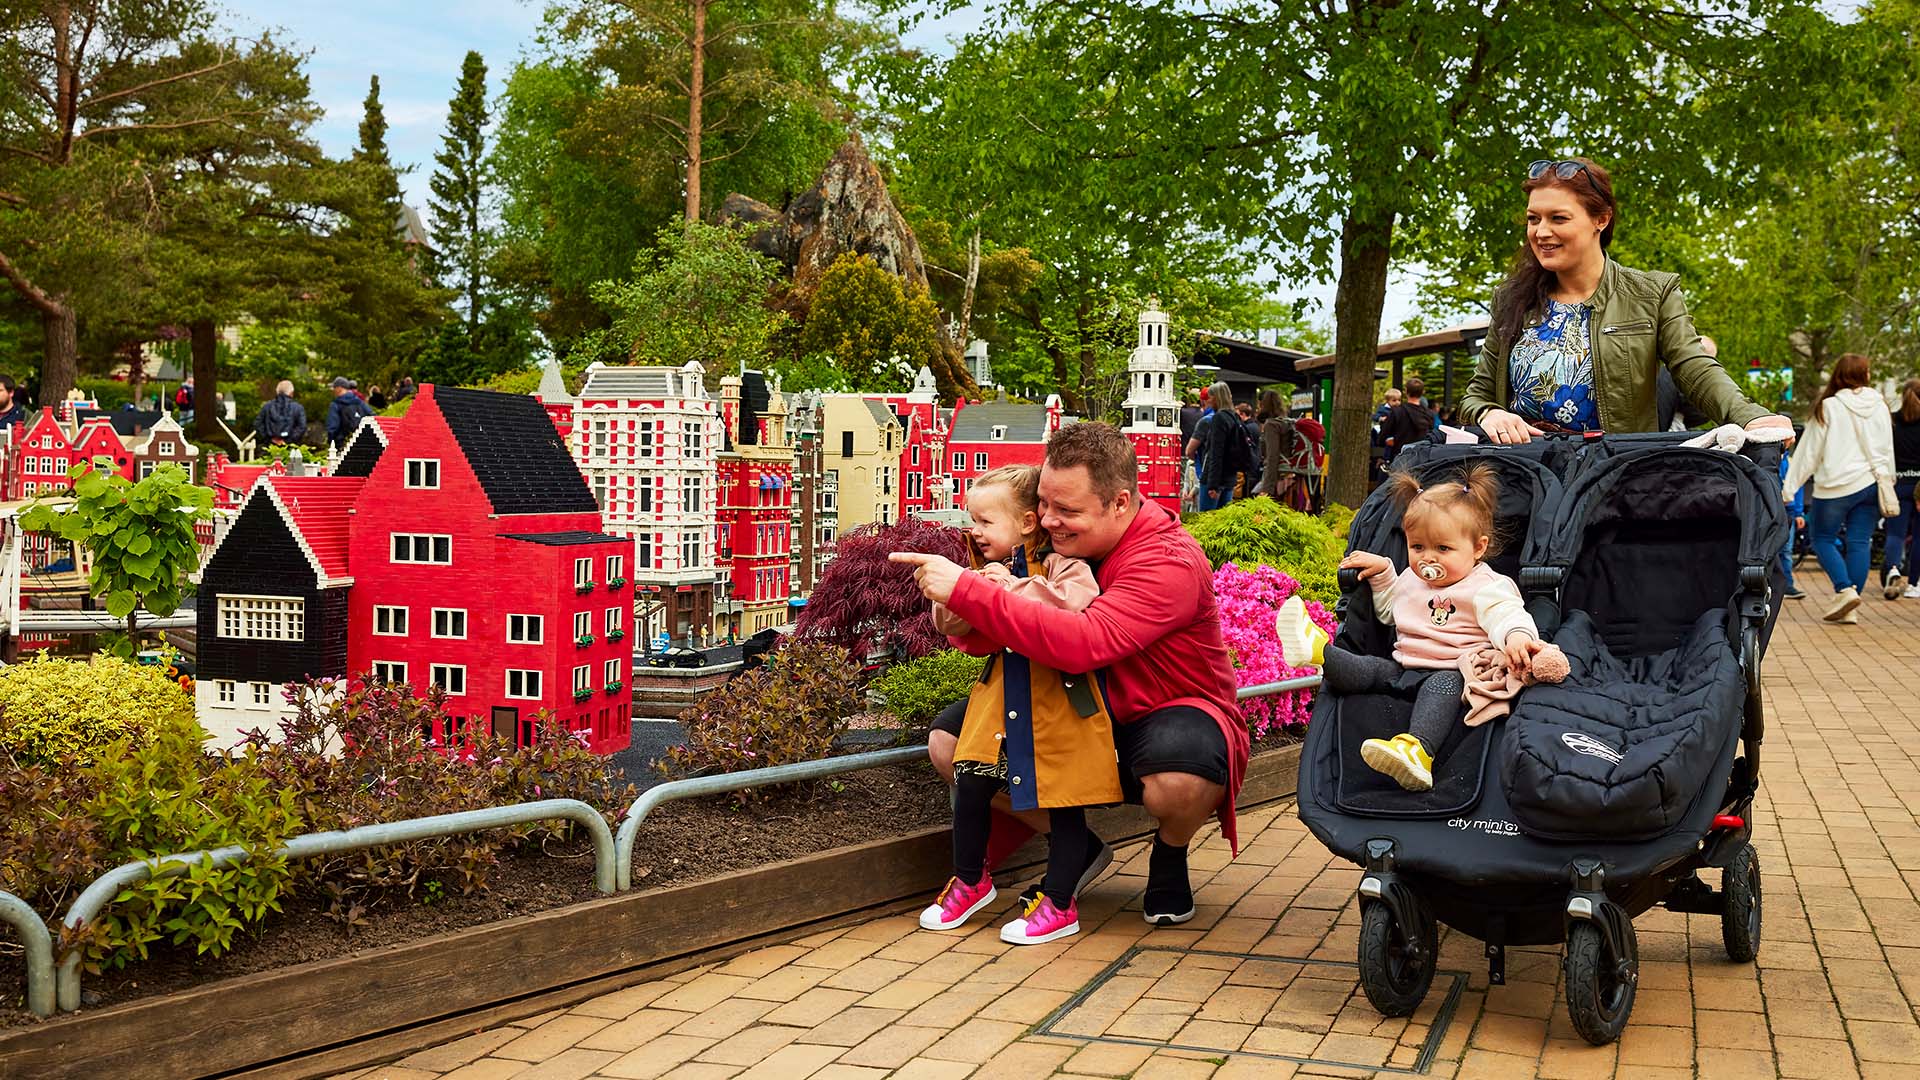 Plan your day at LEGOLAND